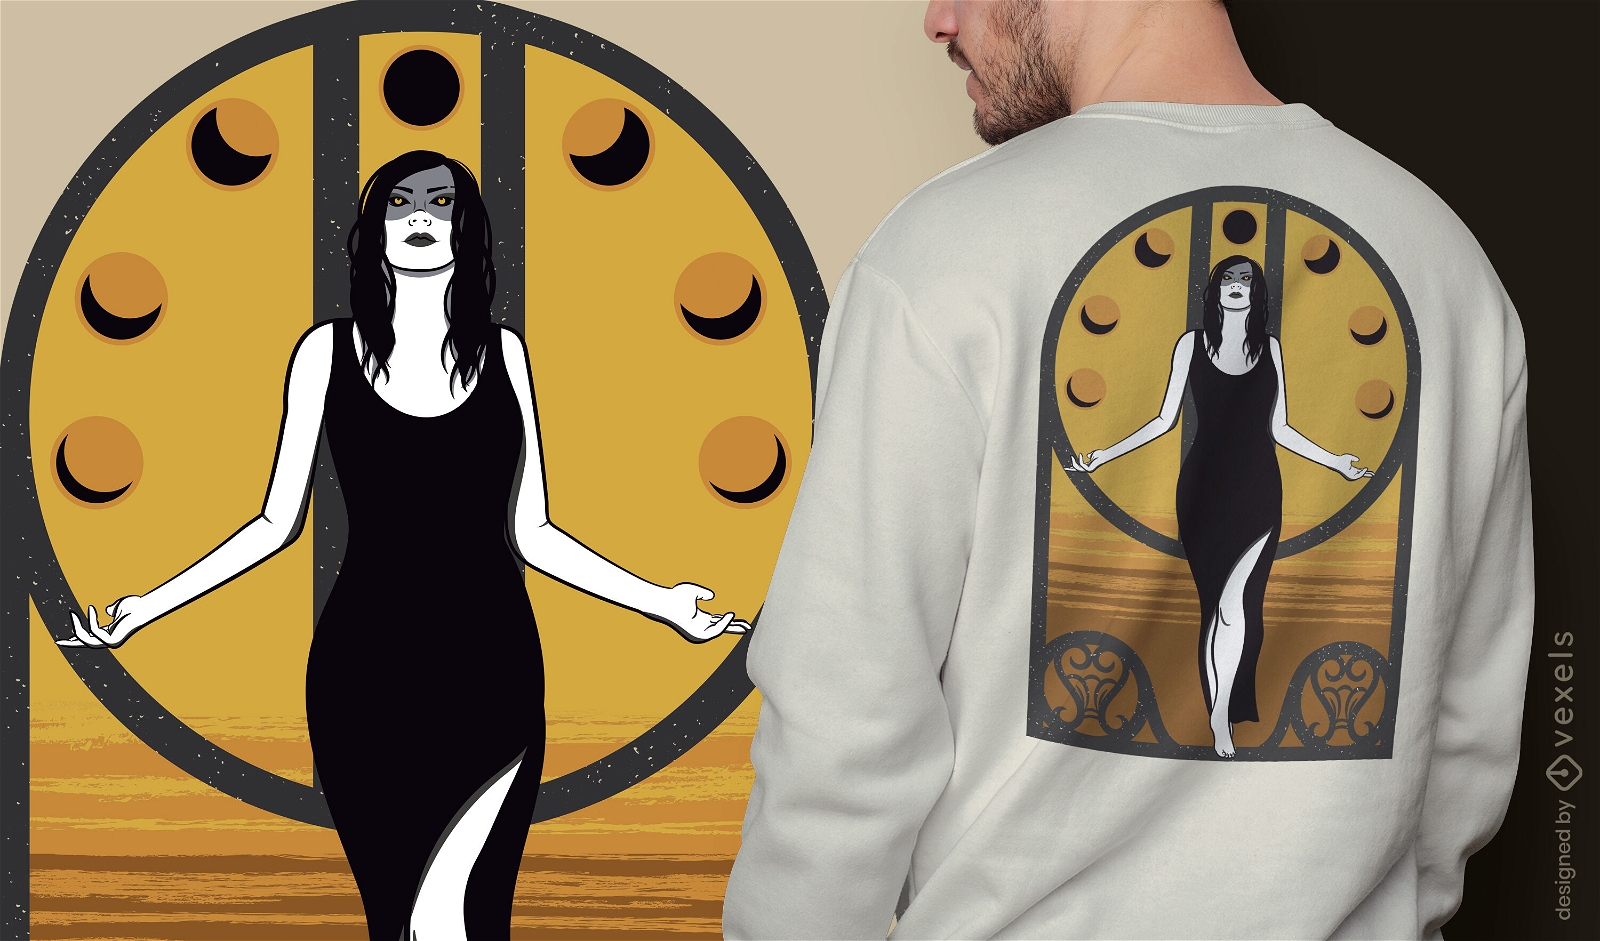 Awesome moon sorceress t-shirt design